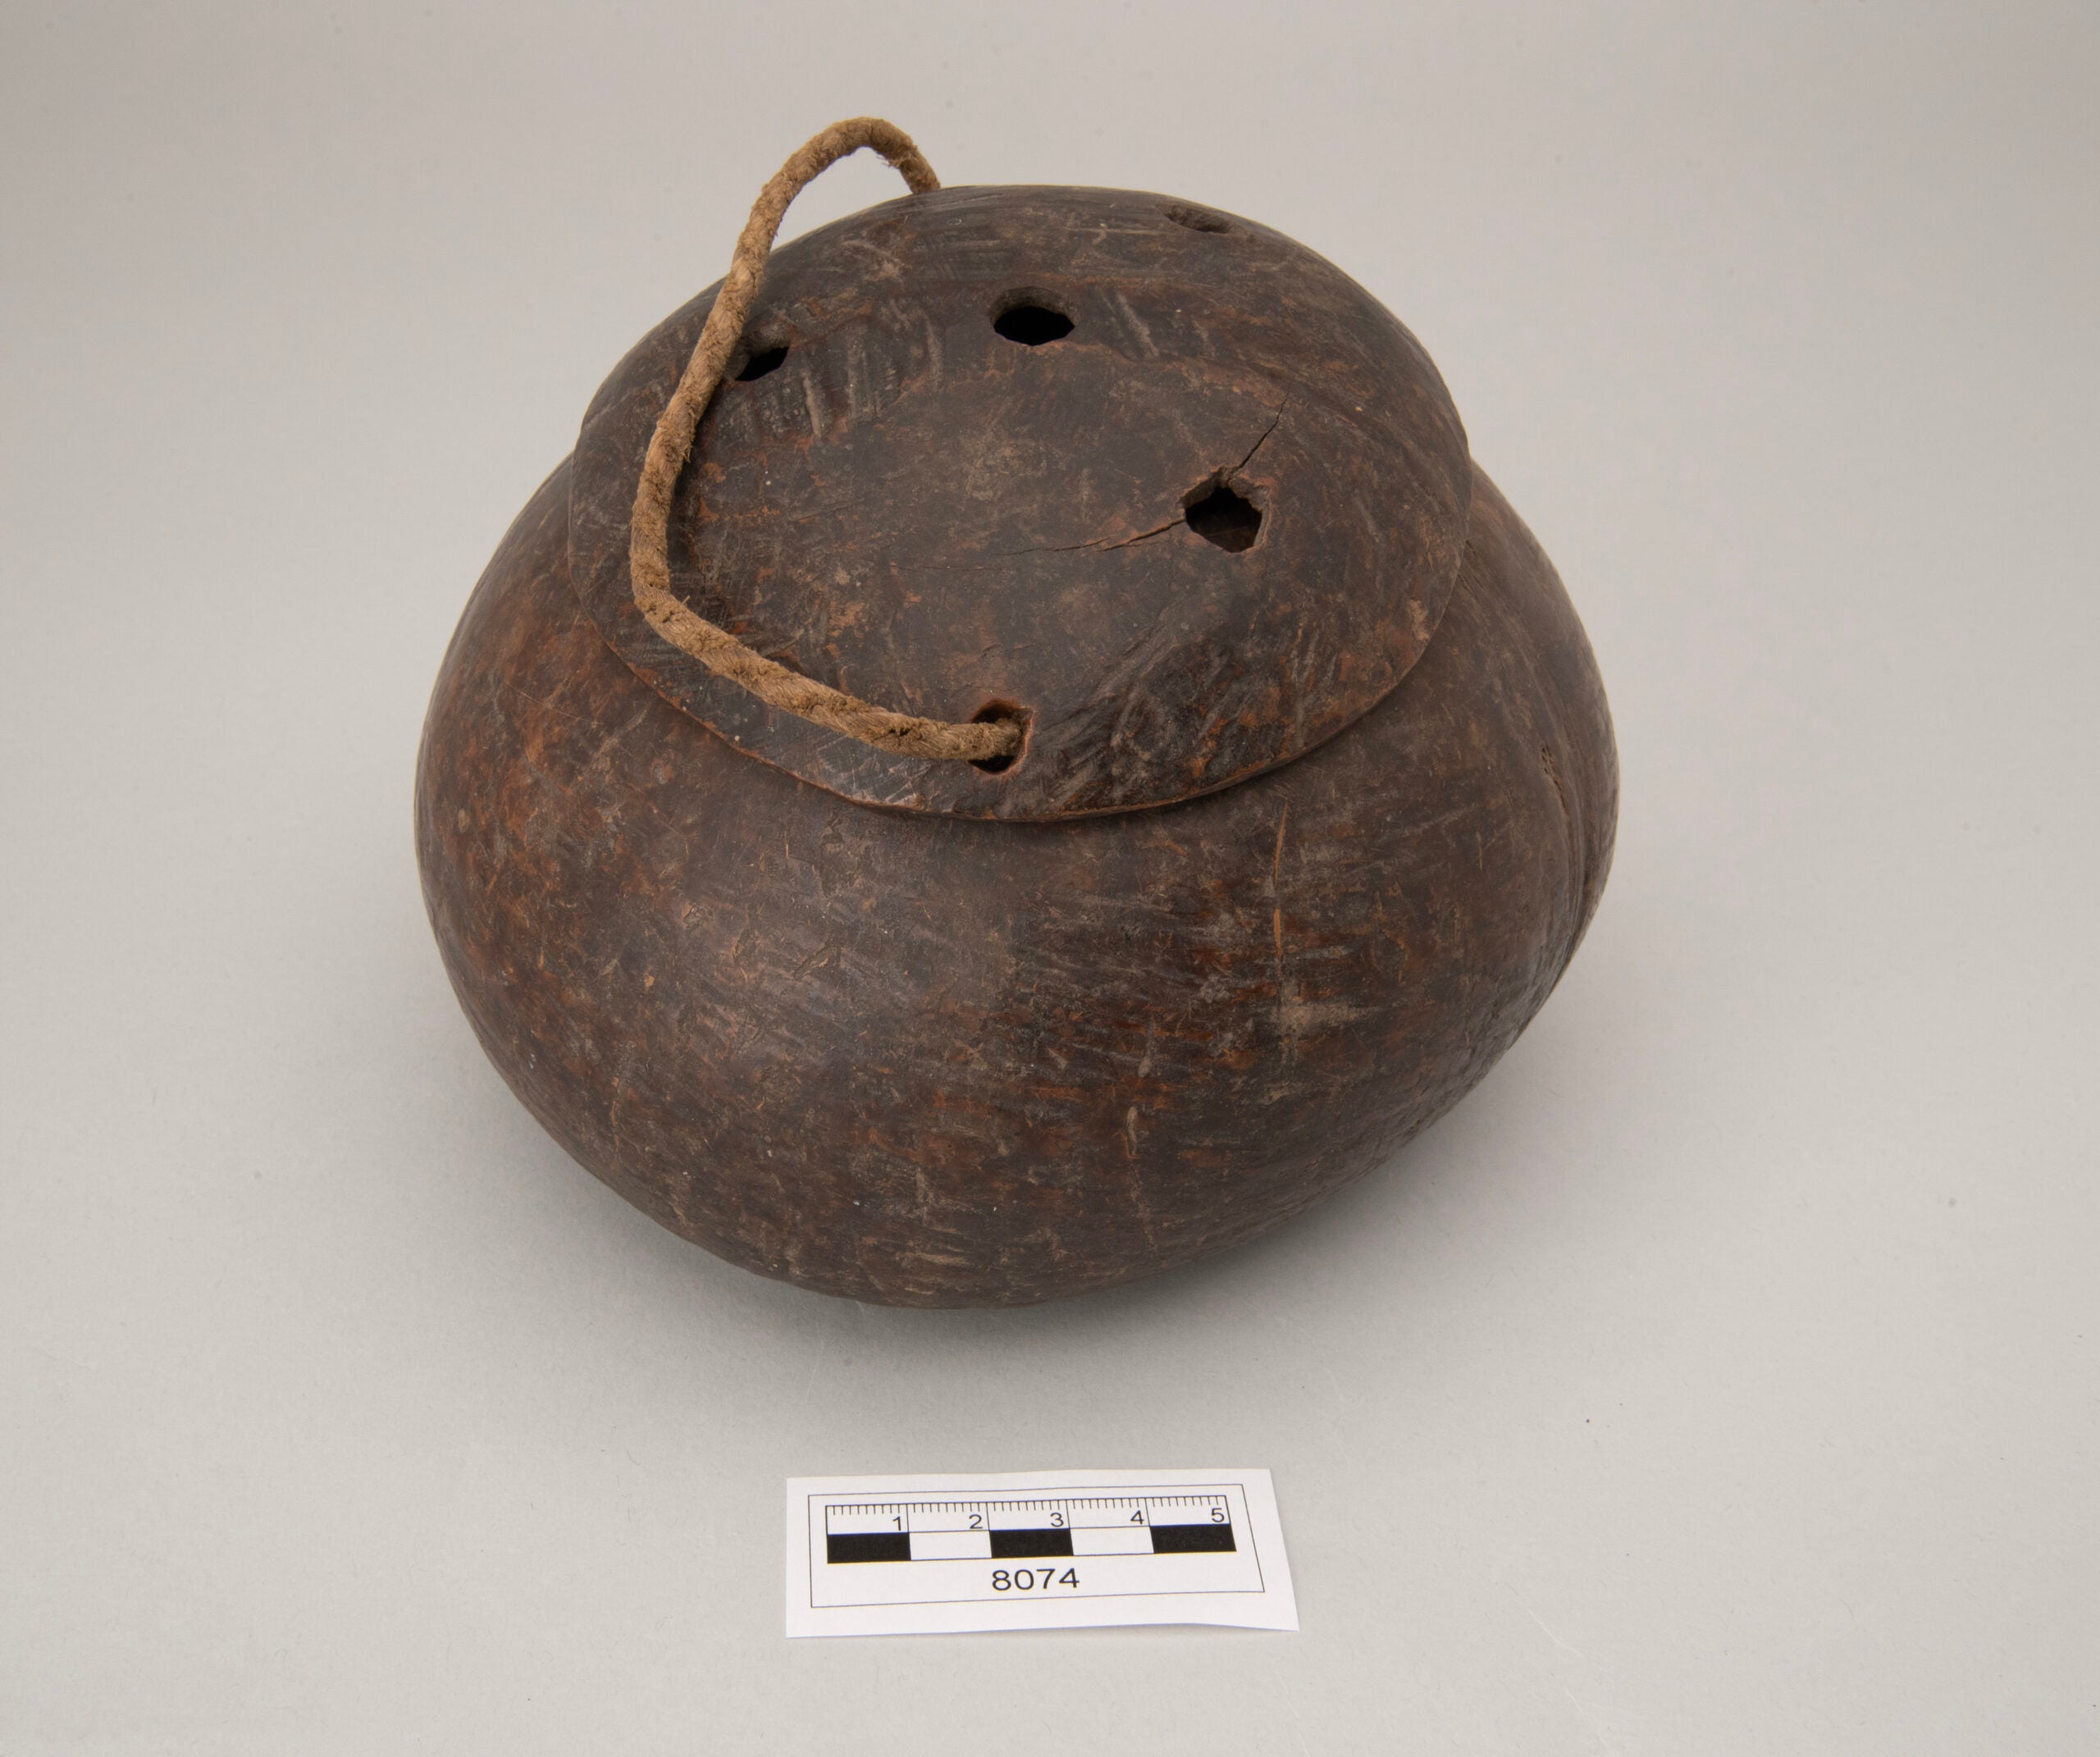 A container made out of out a coconut shell, with its lid on. Three holes on the top of the lid and an attached string are visible.